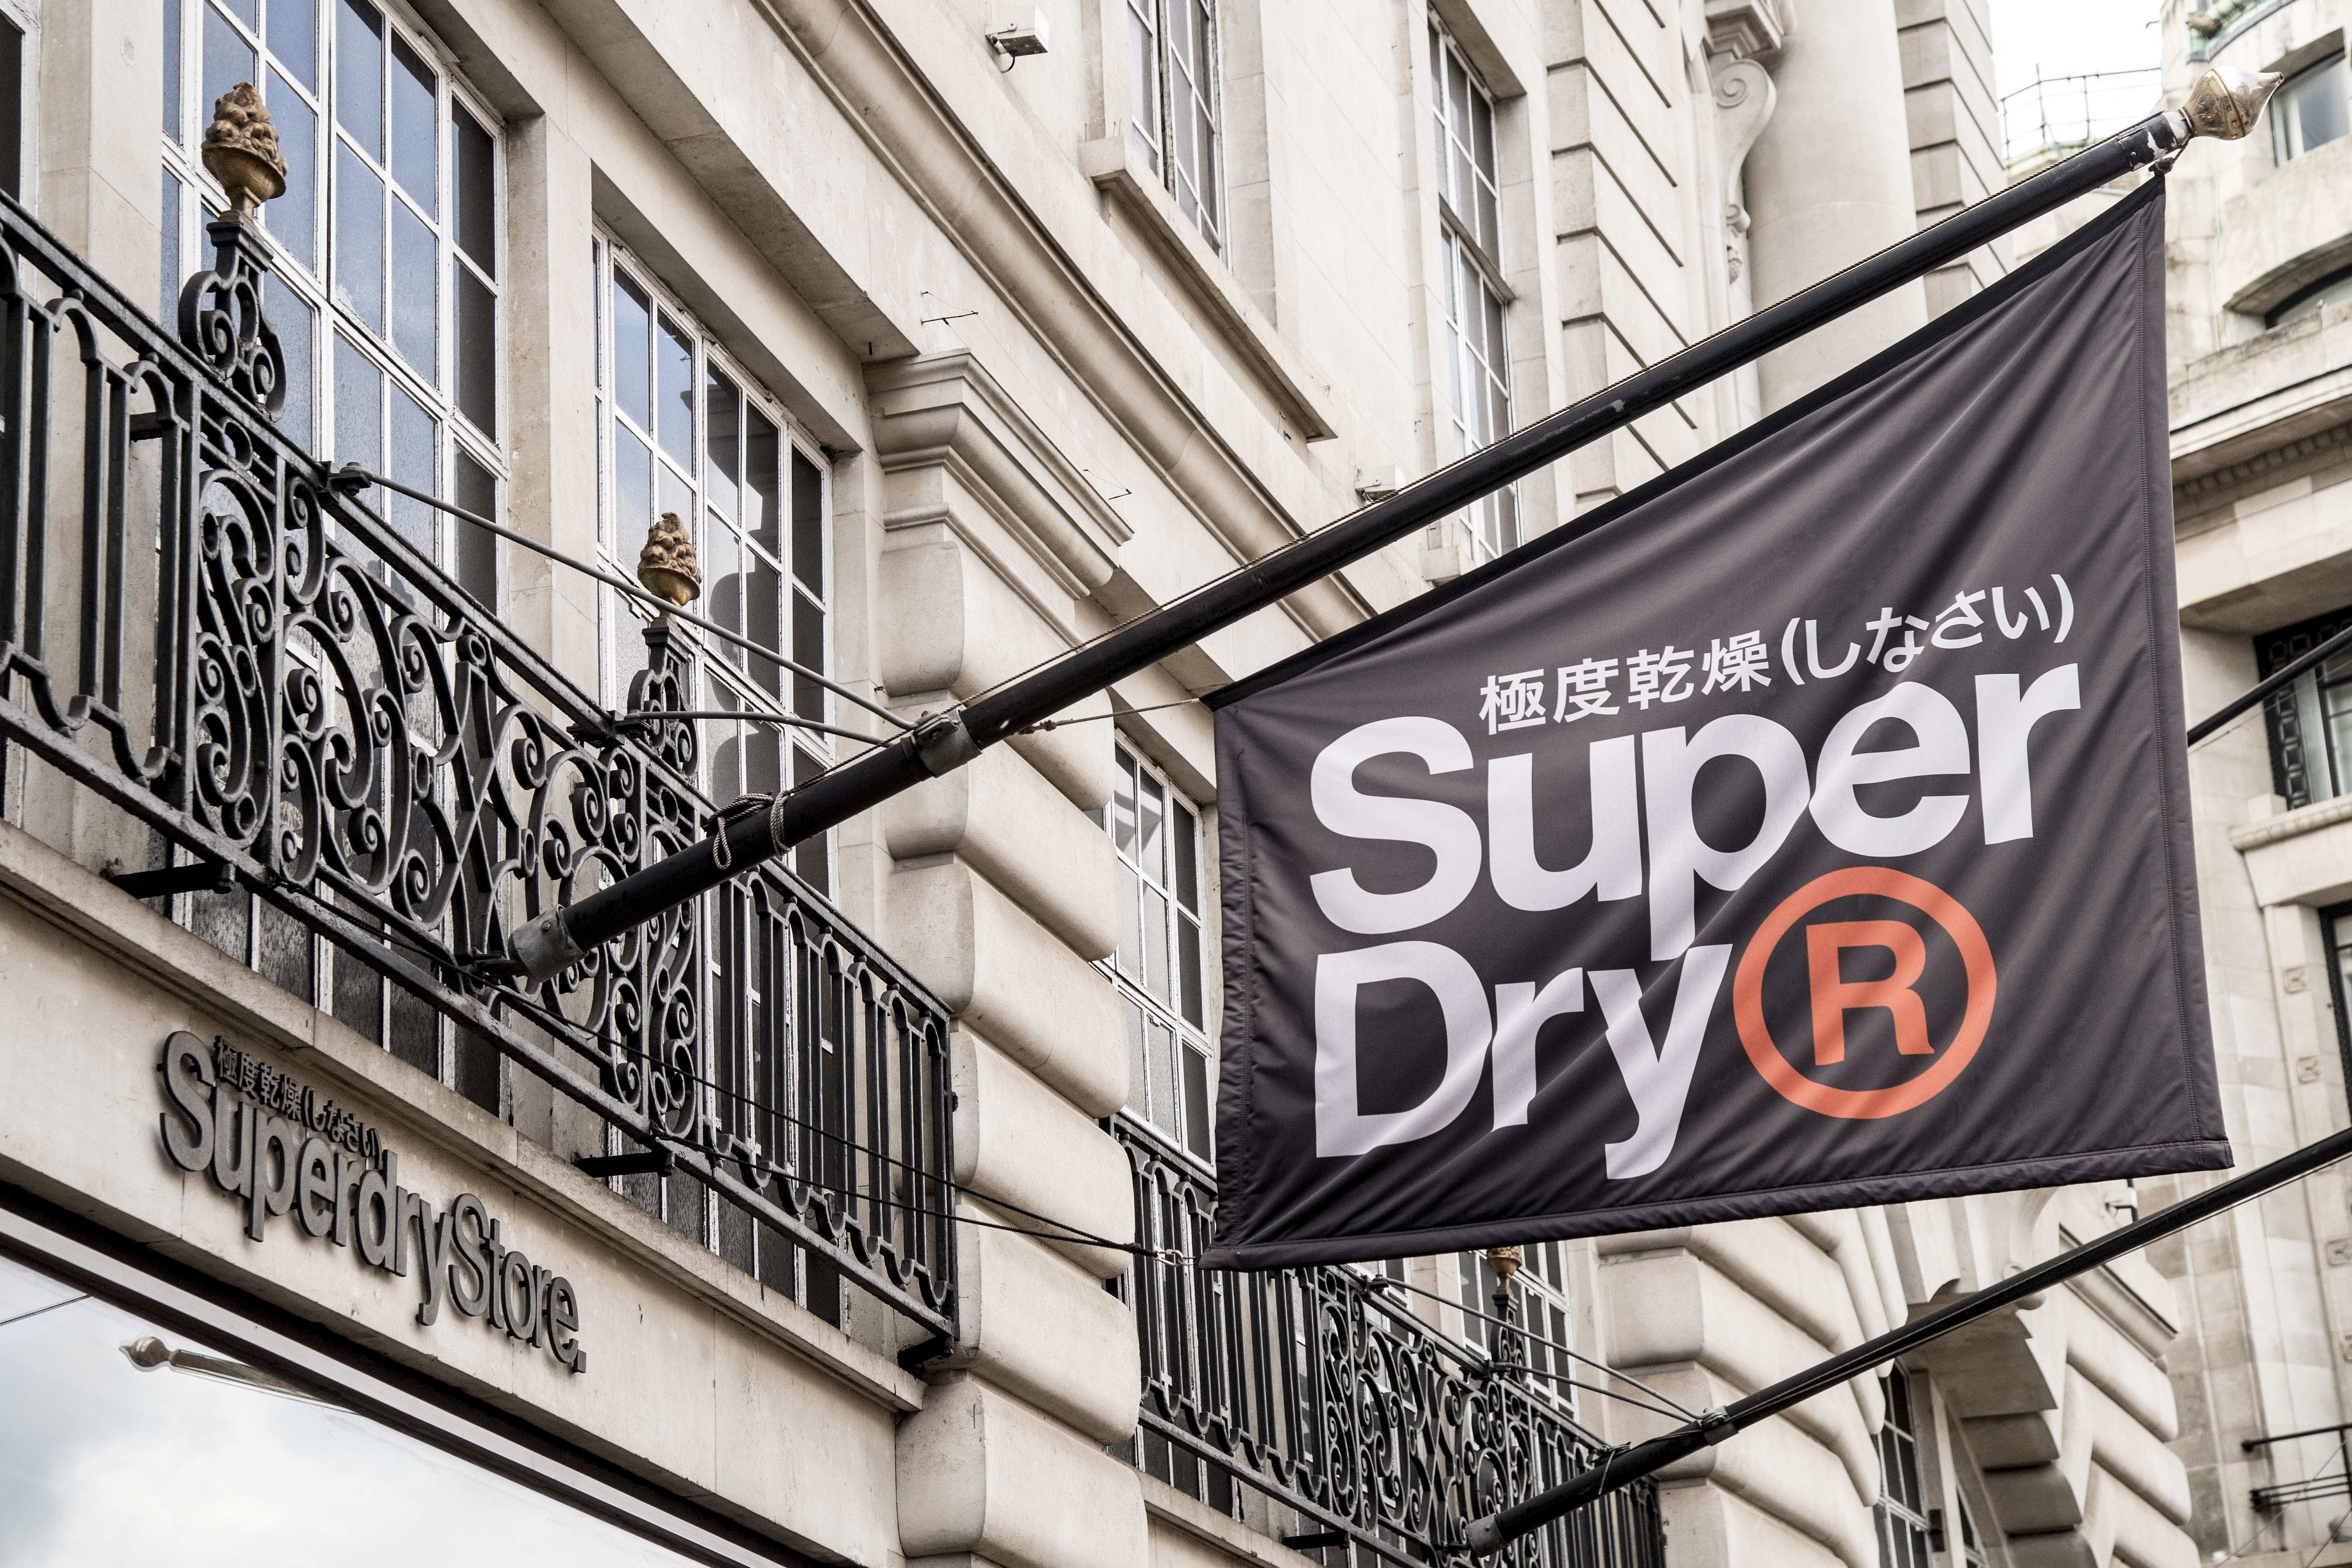 Superdry shares rocketed after the fashion firm announced a joint venture to boost growth in India (Ian West/PA)